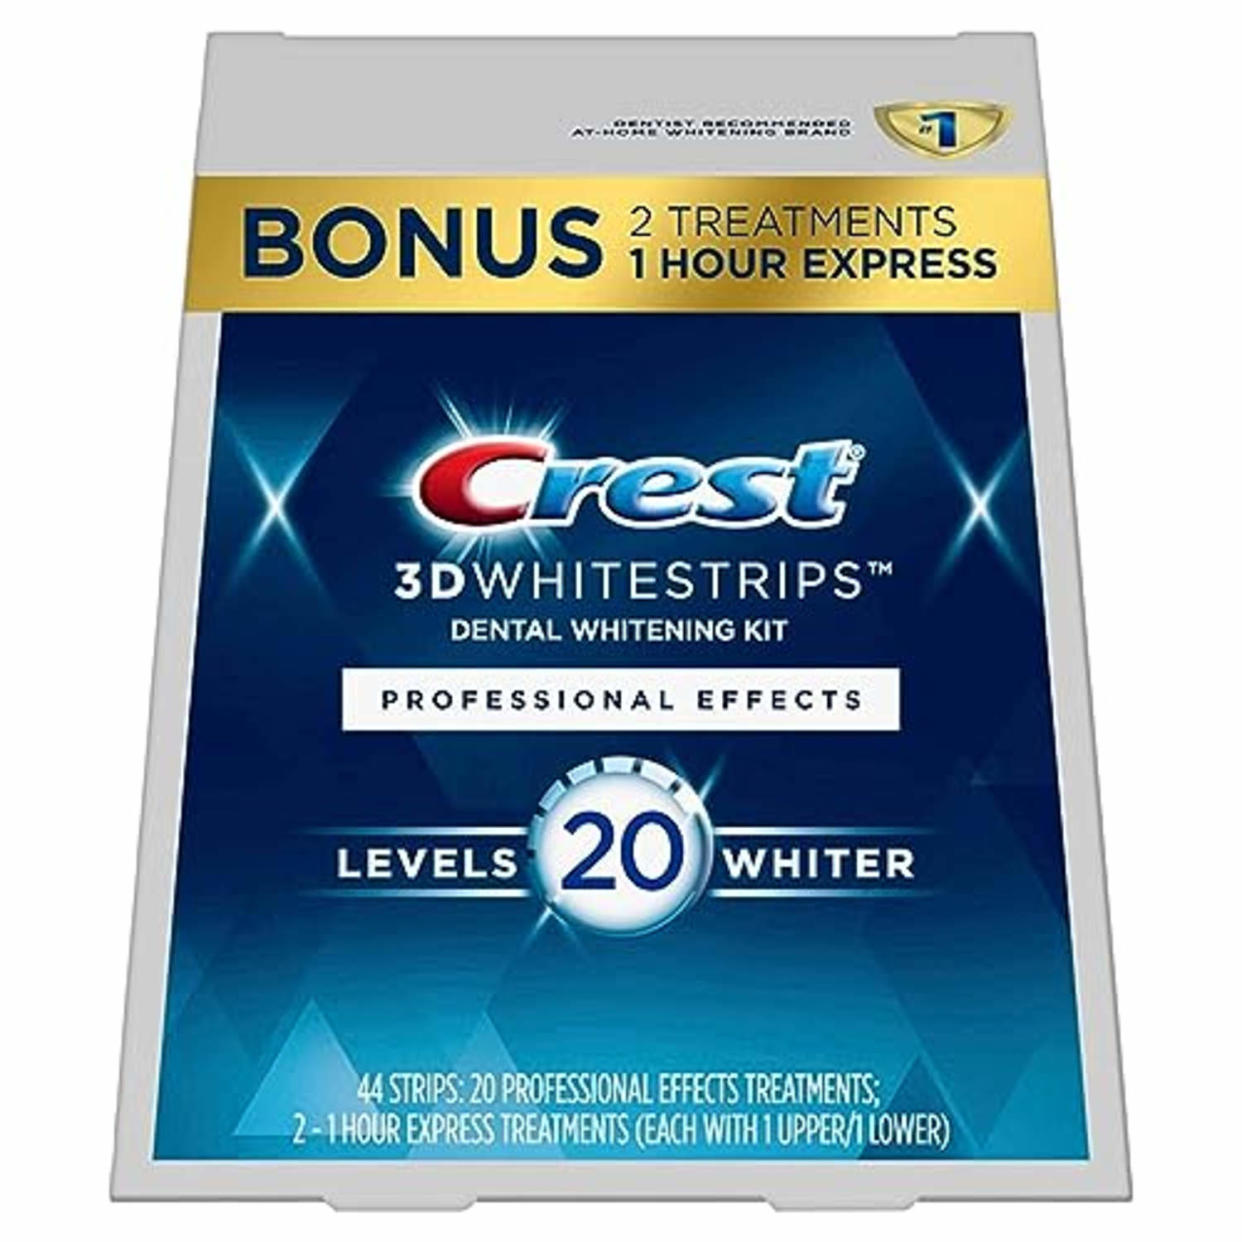 FOR BFCM BACON- Crest 3D Whitestrips, Professional Effects, Teeth Whitening Strip Kit, 44 Strips (22 Count Pack) (Amazon / Amazon)